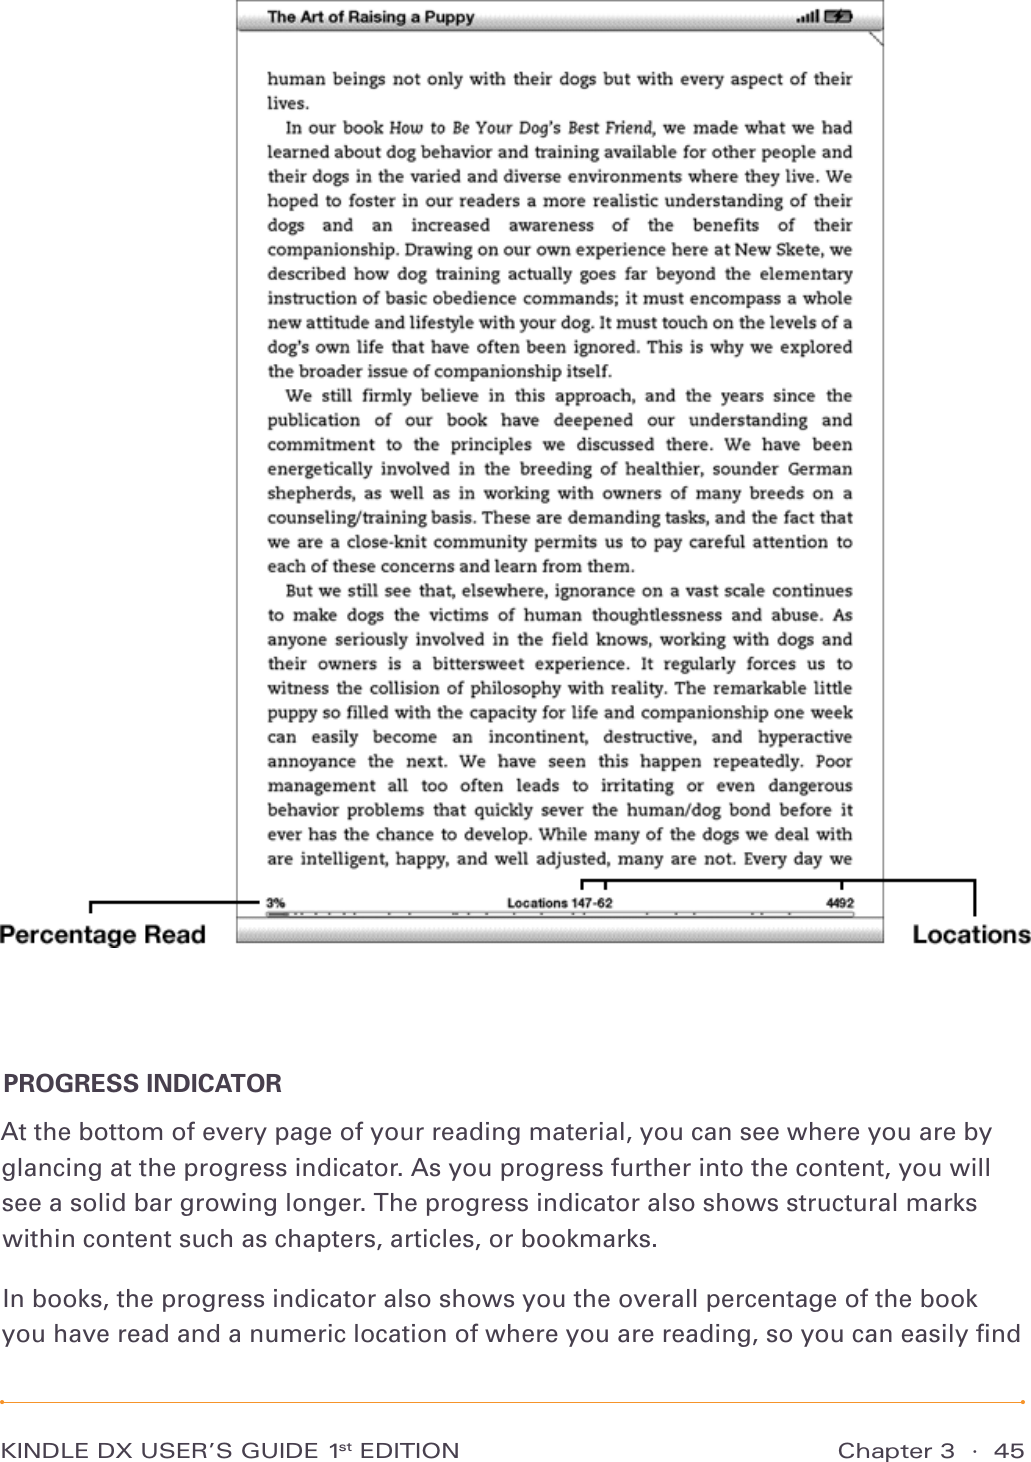 KINDLE DX USER’S GUIDE 1st EDITION Chapter 3  ·  45PROGRESS INDICATORAt the bottom of every page of your reading material, you can see where you are by glancing at the progress indicator. As you progress further into the content, you will see a solid bar growing longer. The progress indicator also shows structural marks within content such as chapters, articles, or bookmarks.In books, the progress indicator also shows you the overall percentage of the book you have read and a numeric location of where you are reading, so you can easily ﬁnd 